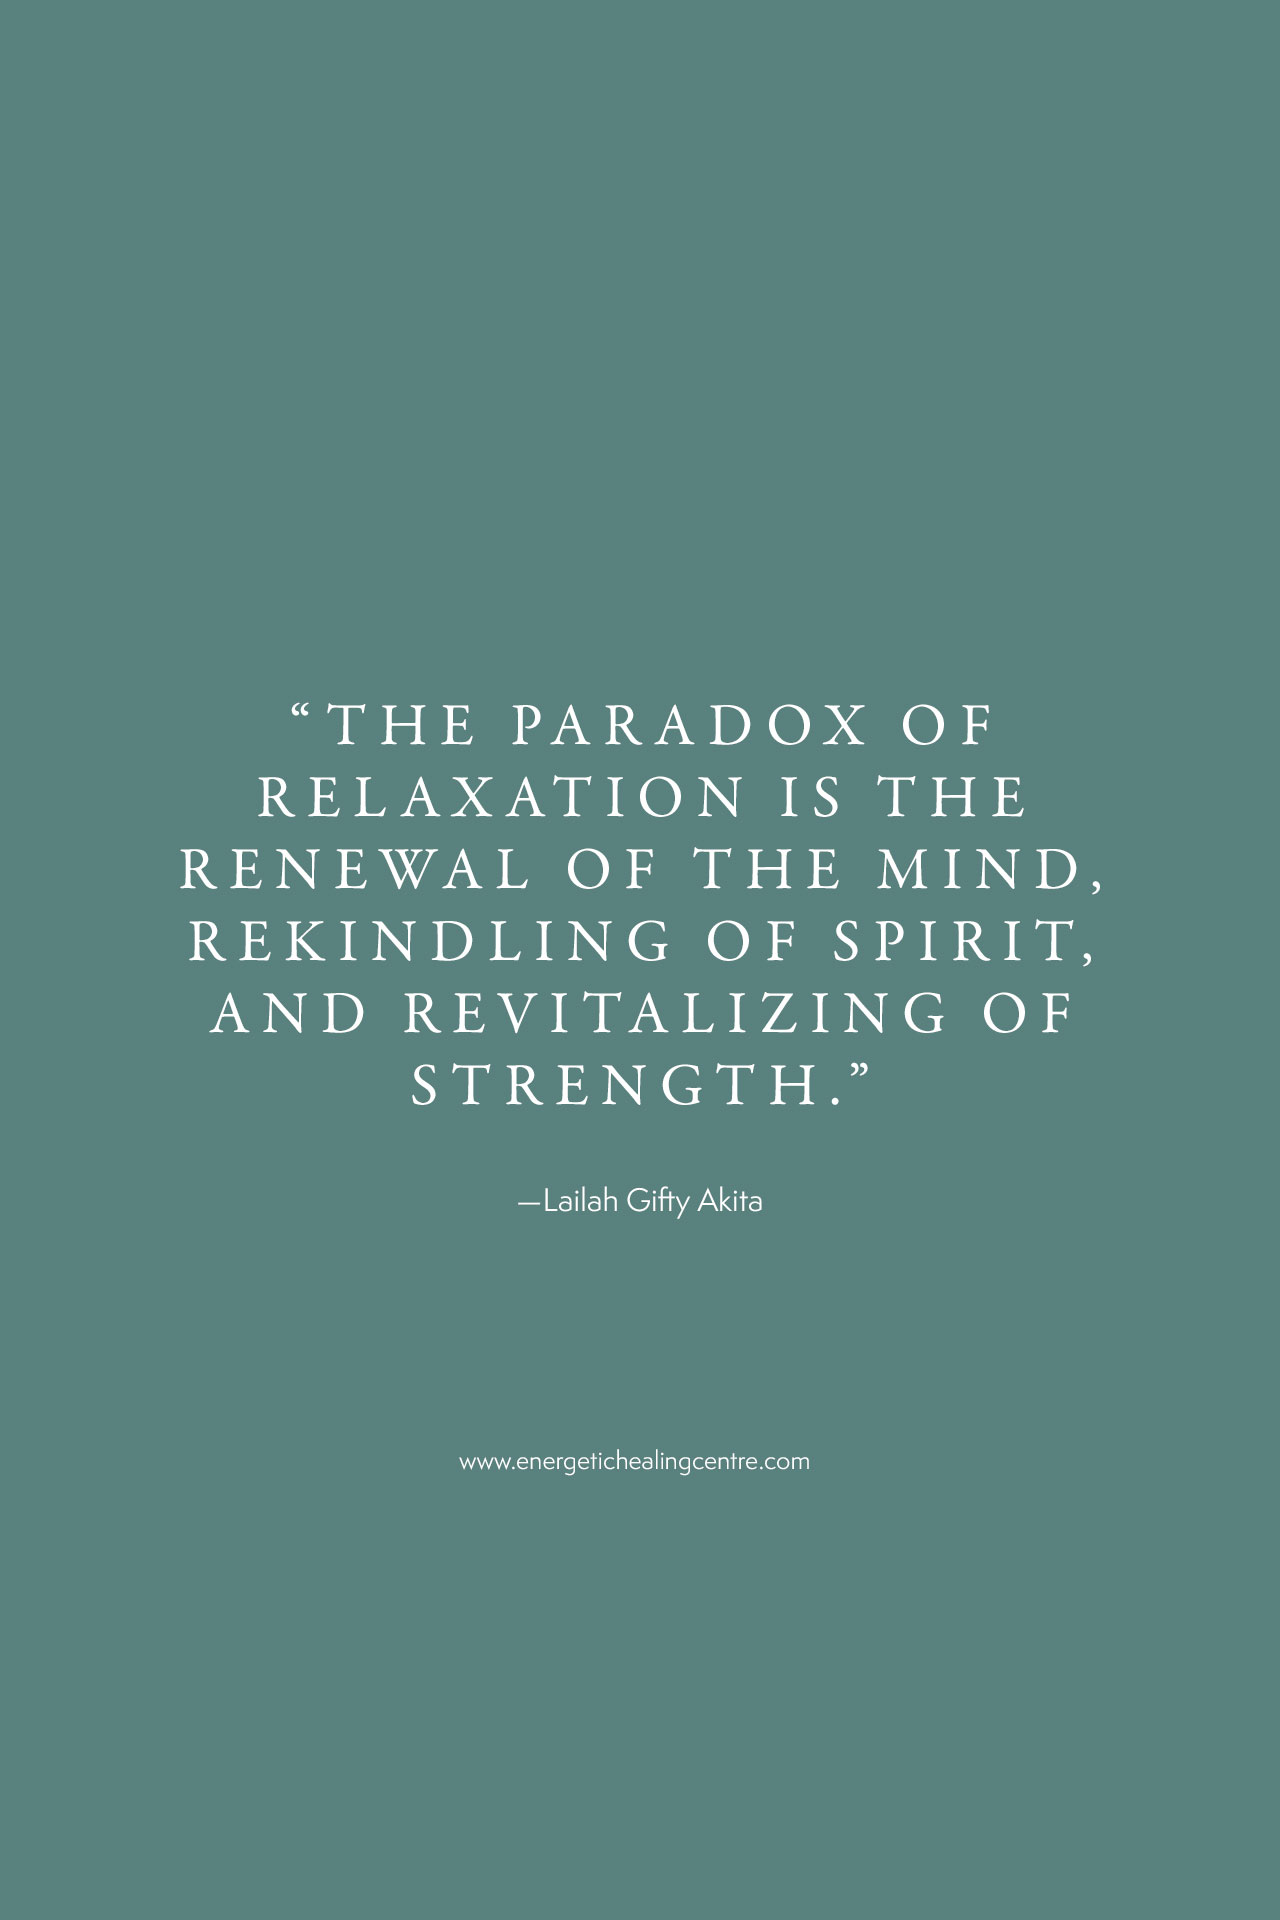 “The paradox of relaxation is the renewal of the mind, rekindling of spirit, and revitalizing of strength” –Lailah Gifty Akita